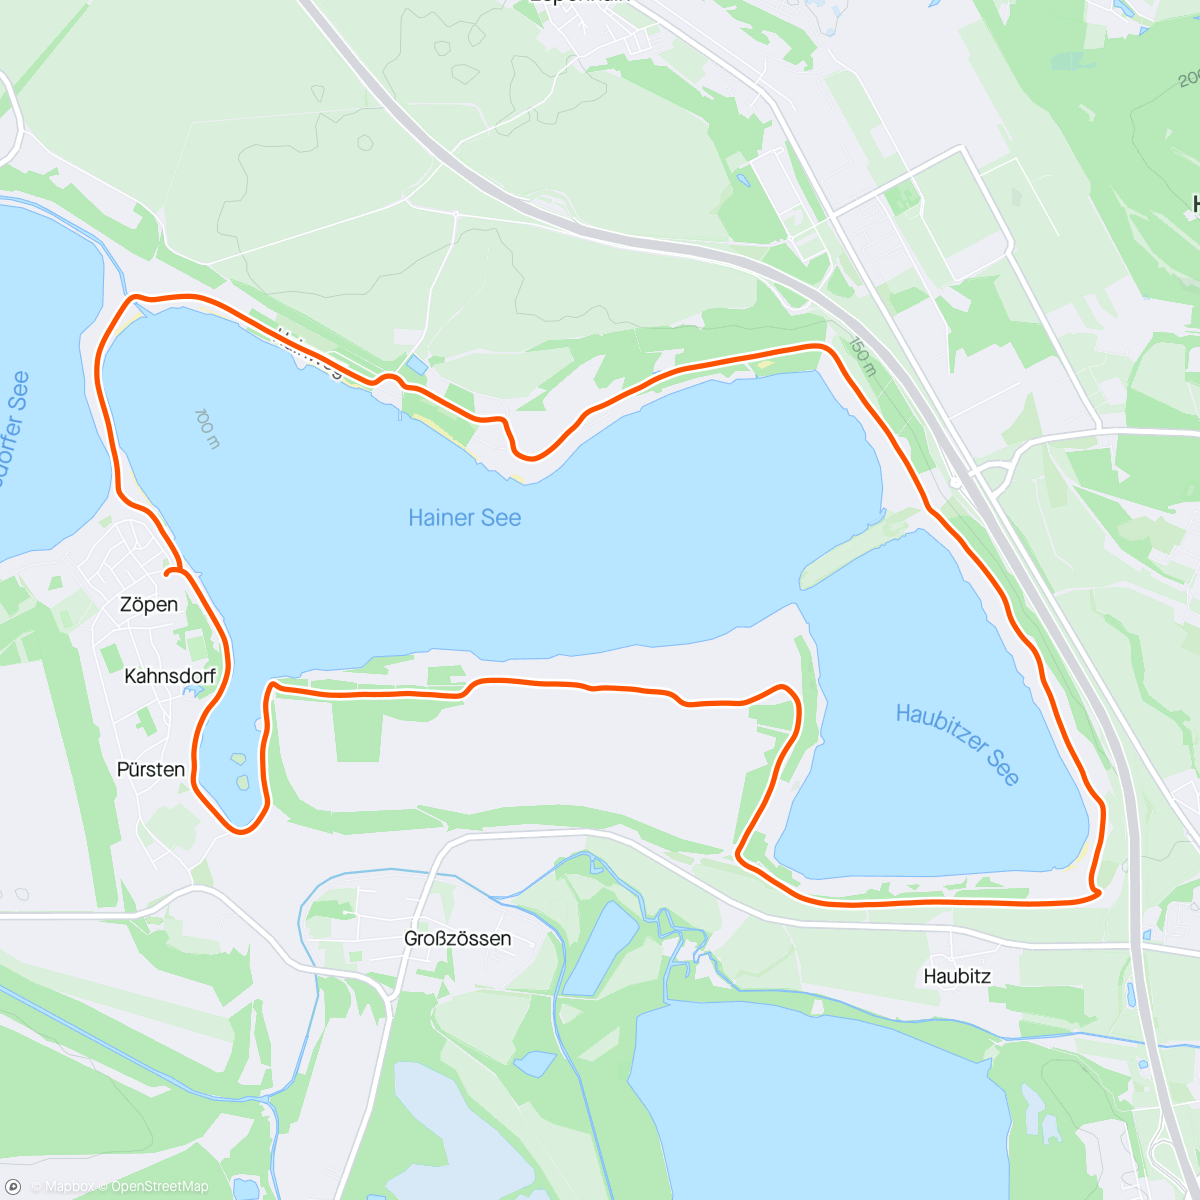 Map of the activity, #runthelake 🐰🏃🏼‍♂️ See Nr. 2 - Hainer See